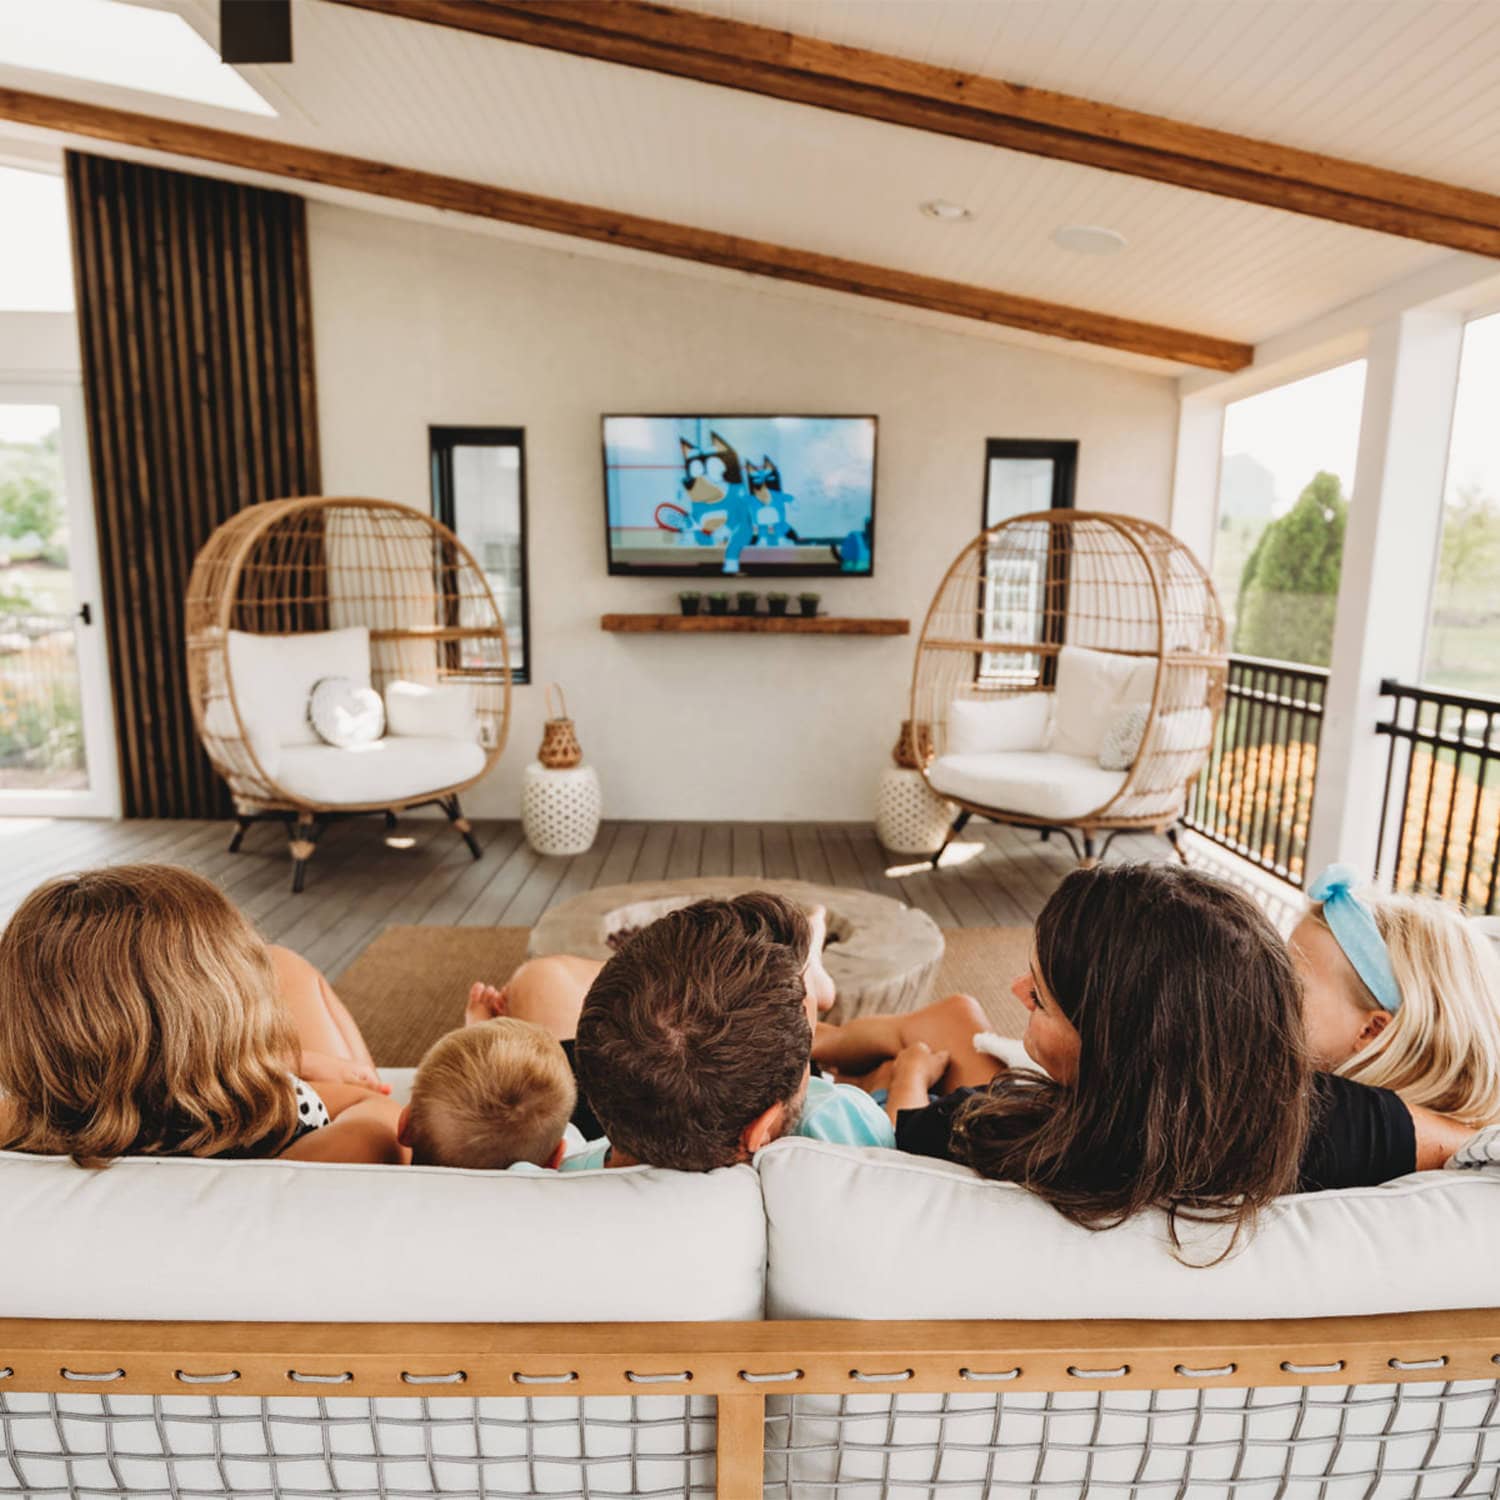 Morning coffee + fresh air + cuddles with the family on the deck watching cartoons = sign us up!!!